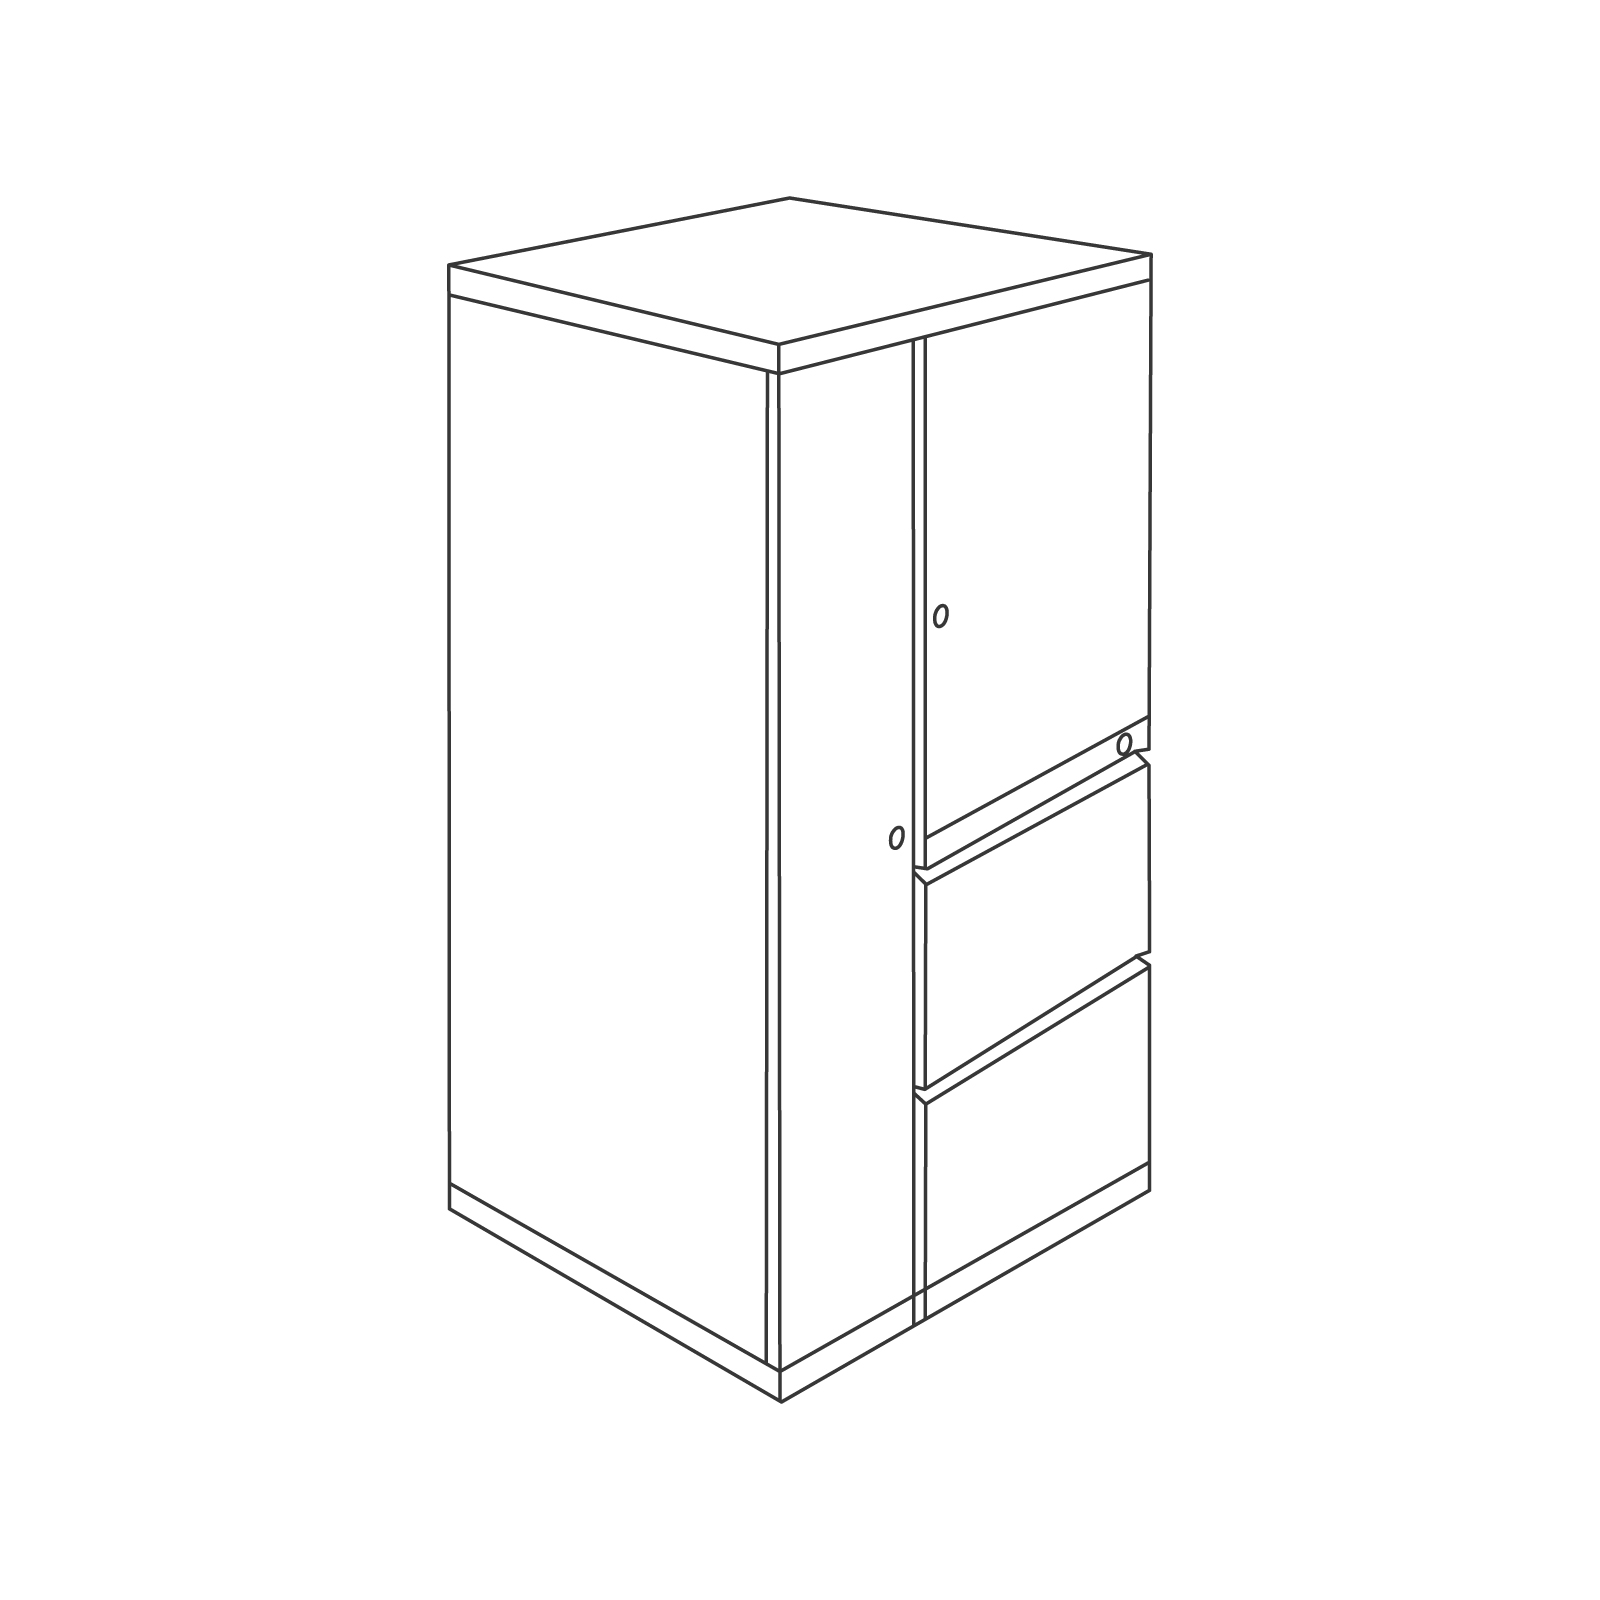 A line drawing - Meridian Storage Tower–Freestanding–Wardrobe and Storage Case